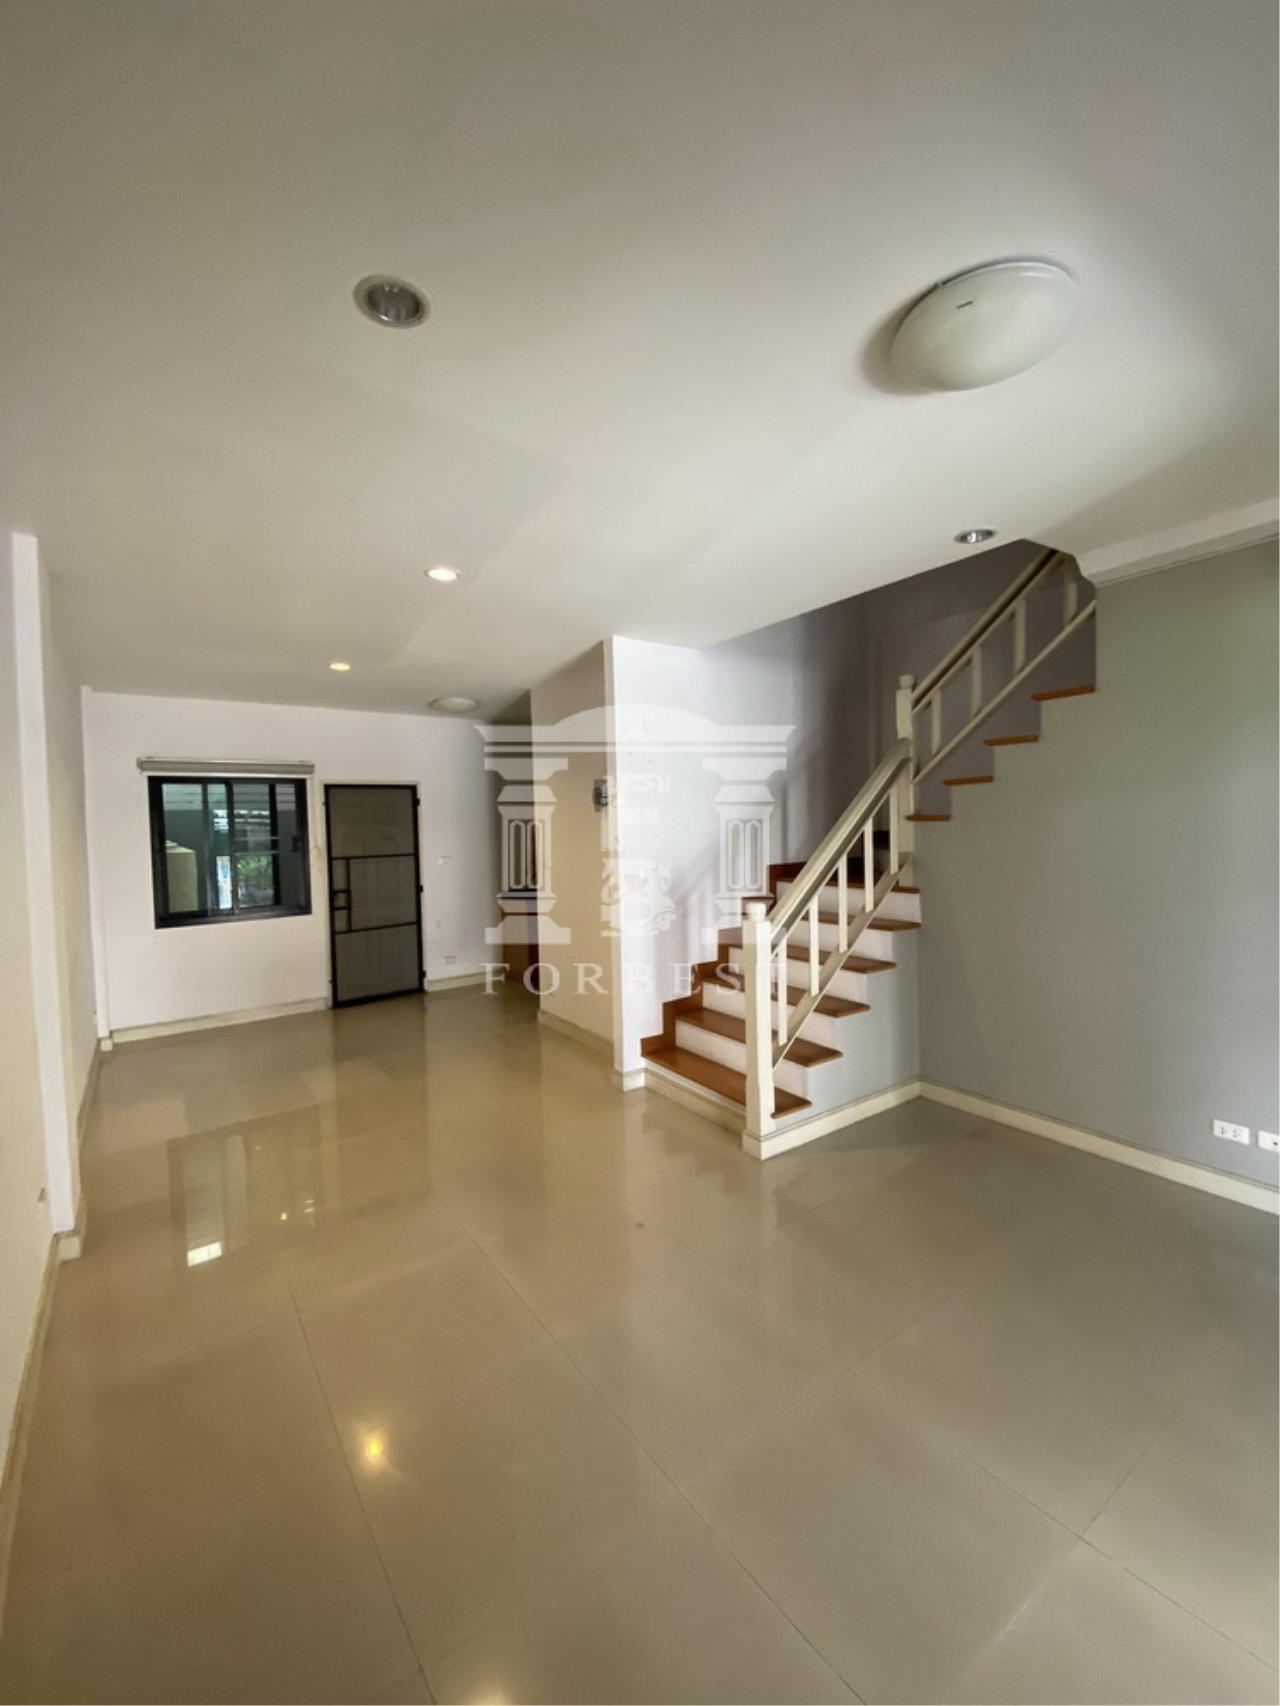 41363-Townhome for sale The Log Town 3 floors Wiratham Sathit Road, ภาพที่ 5